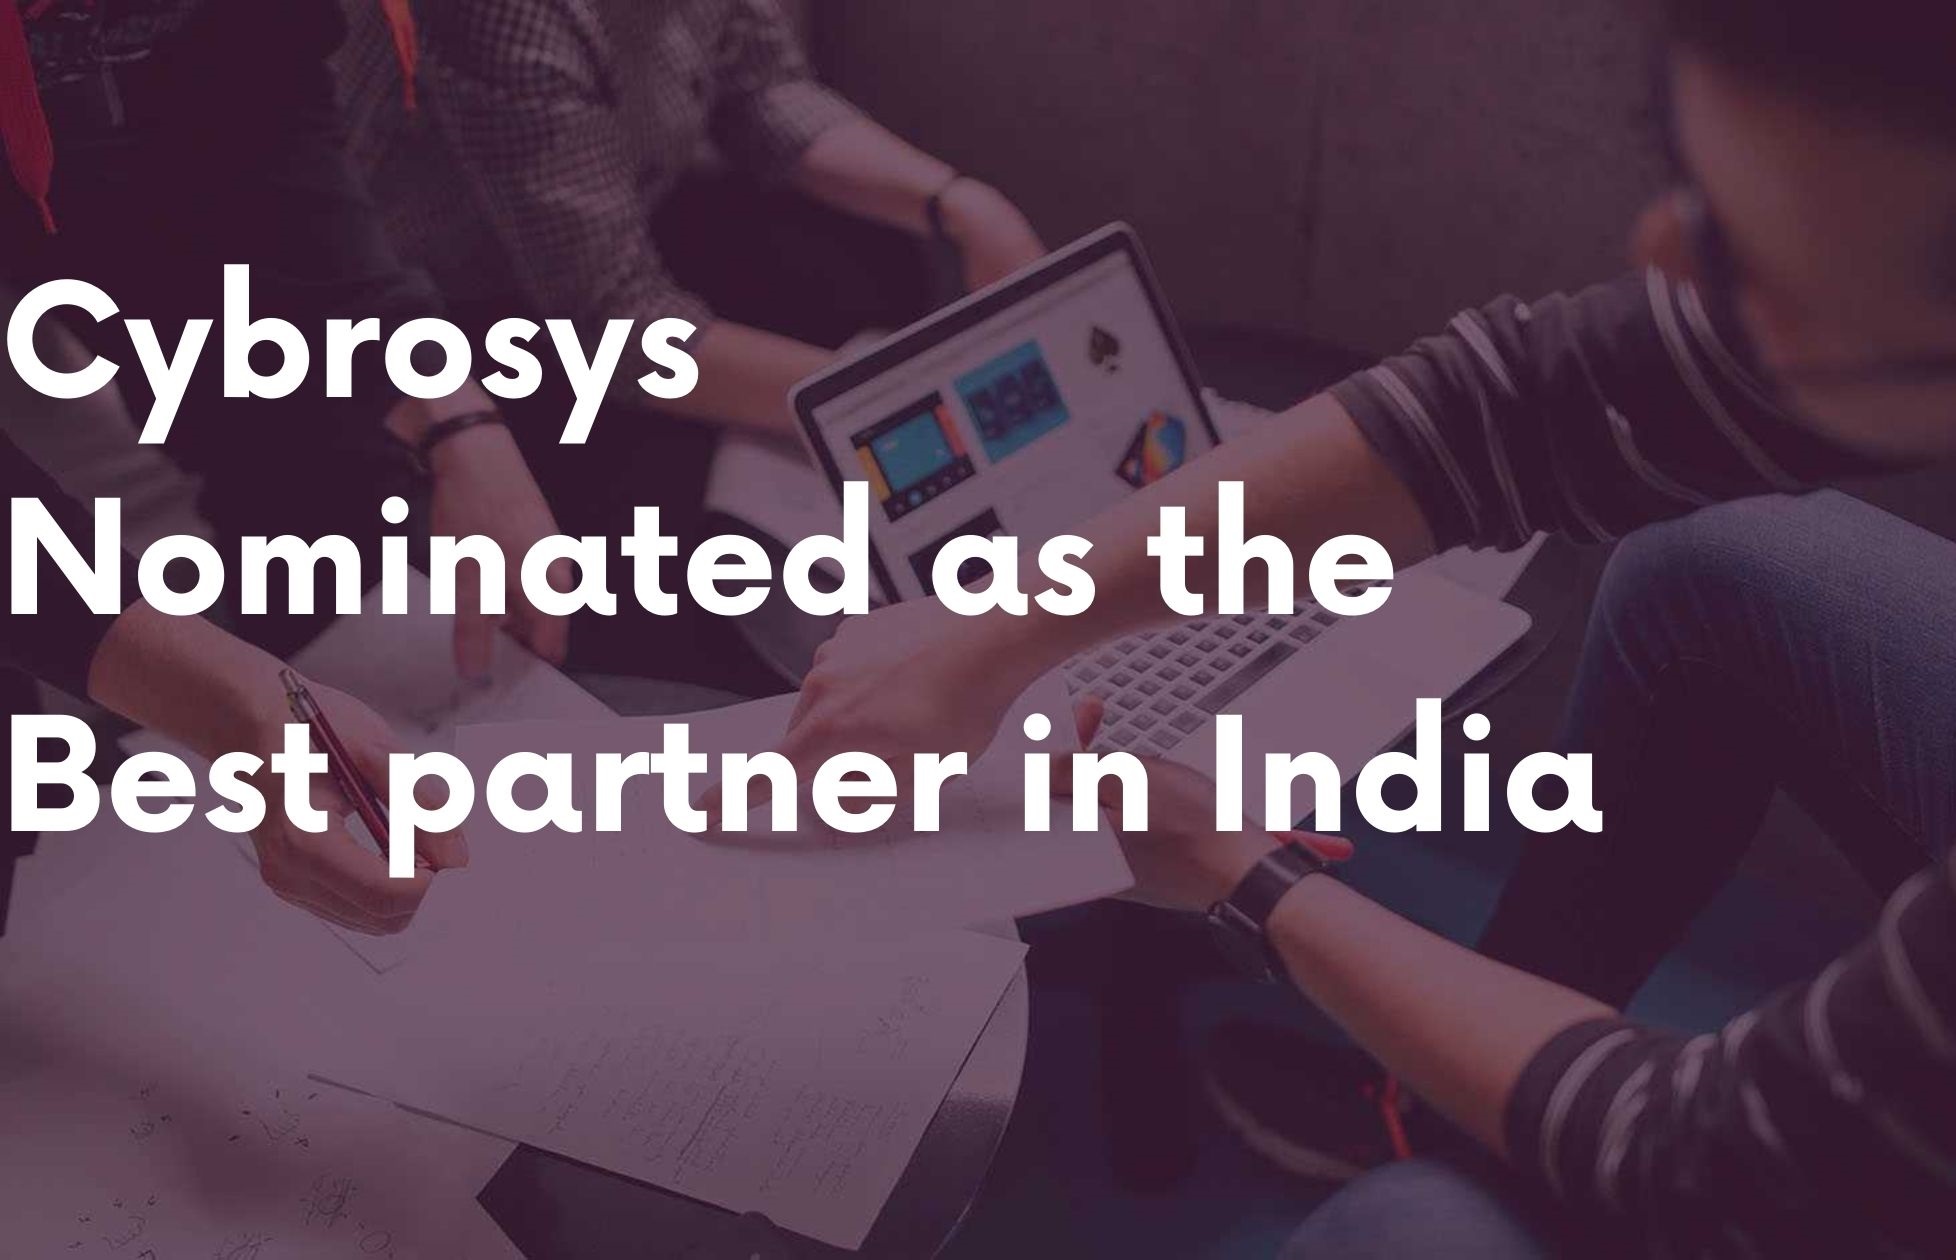 Cybrosys Nominated as the Best partner in India